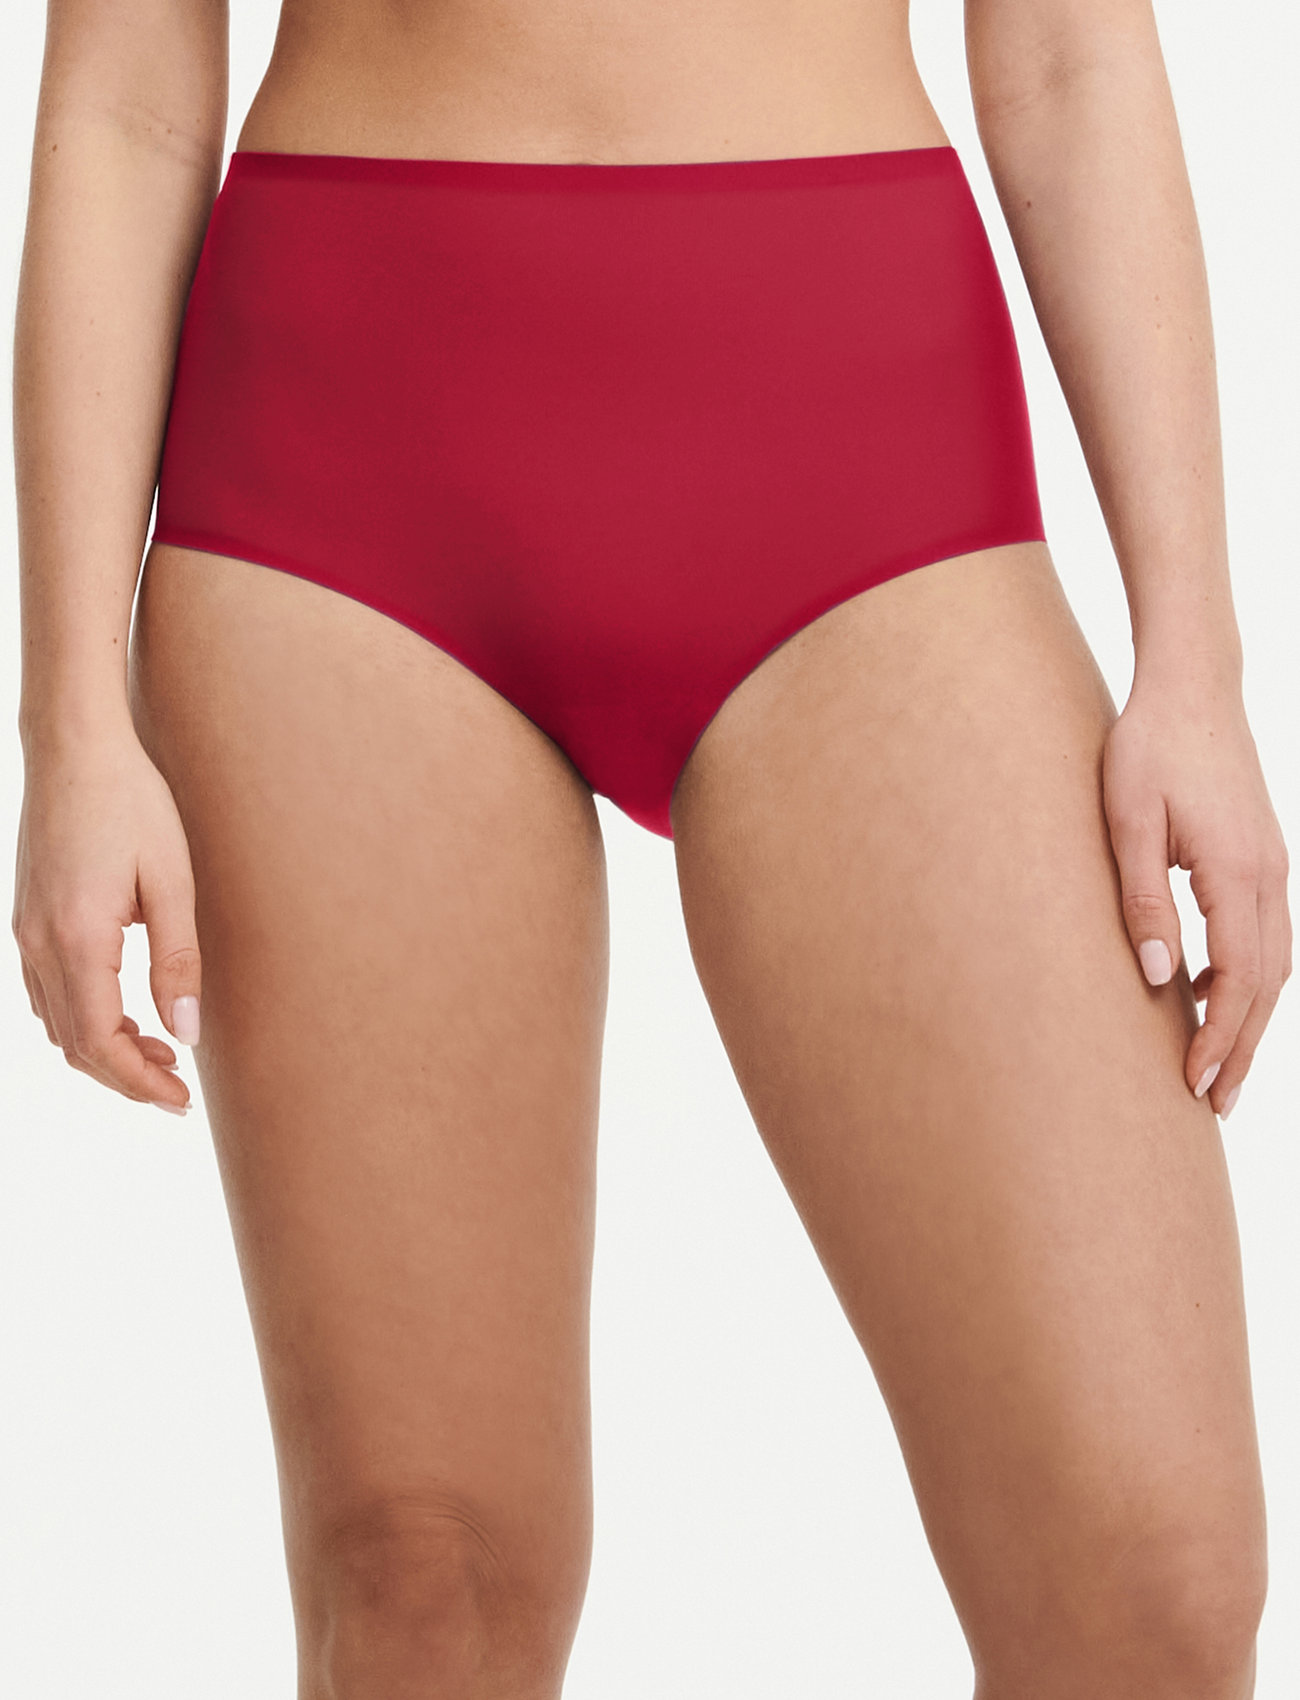 CHANTELLE - Softstretch High Waist Brief - seamless trosor - passion red - 1